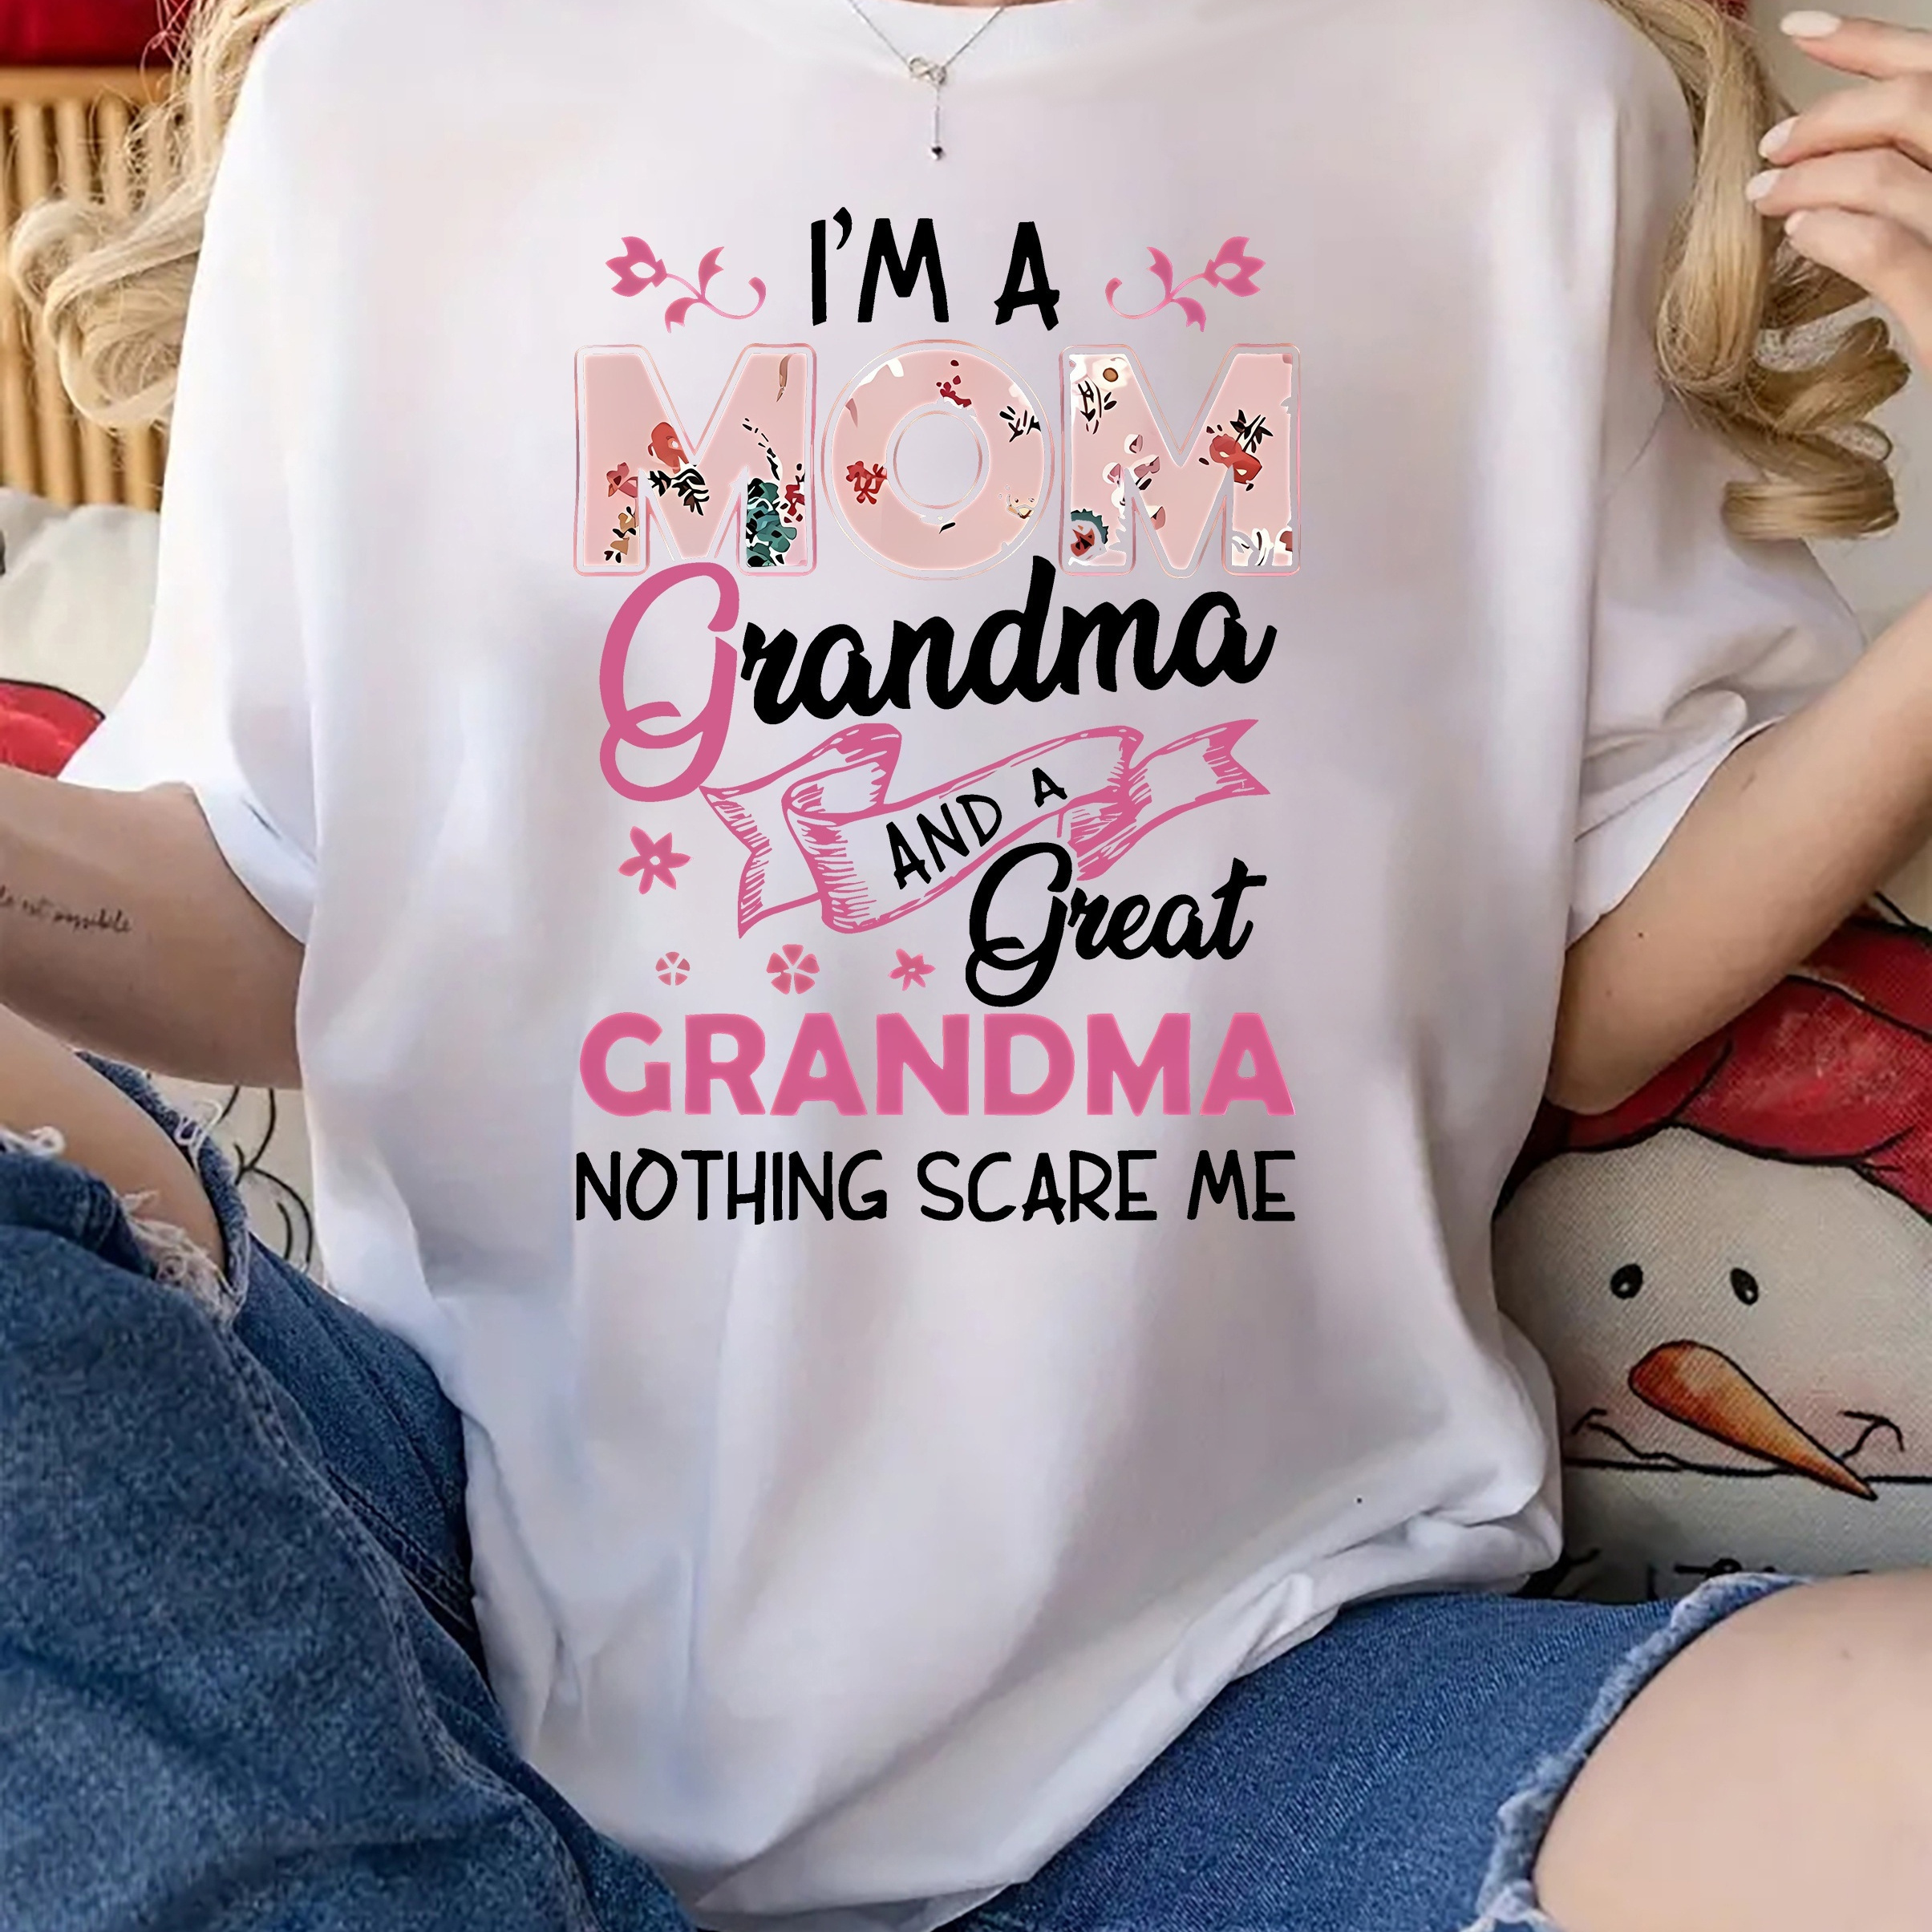 

Women's "i'm A Mom, Grandma, And Great Grandma" Graphic T-shirt, Casual Round-neck Top, Comfort Fit, Short Sleeve, Versatile Tee For Everyday Wear